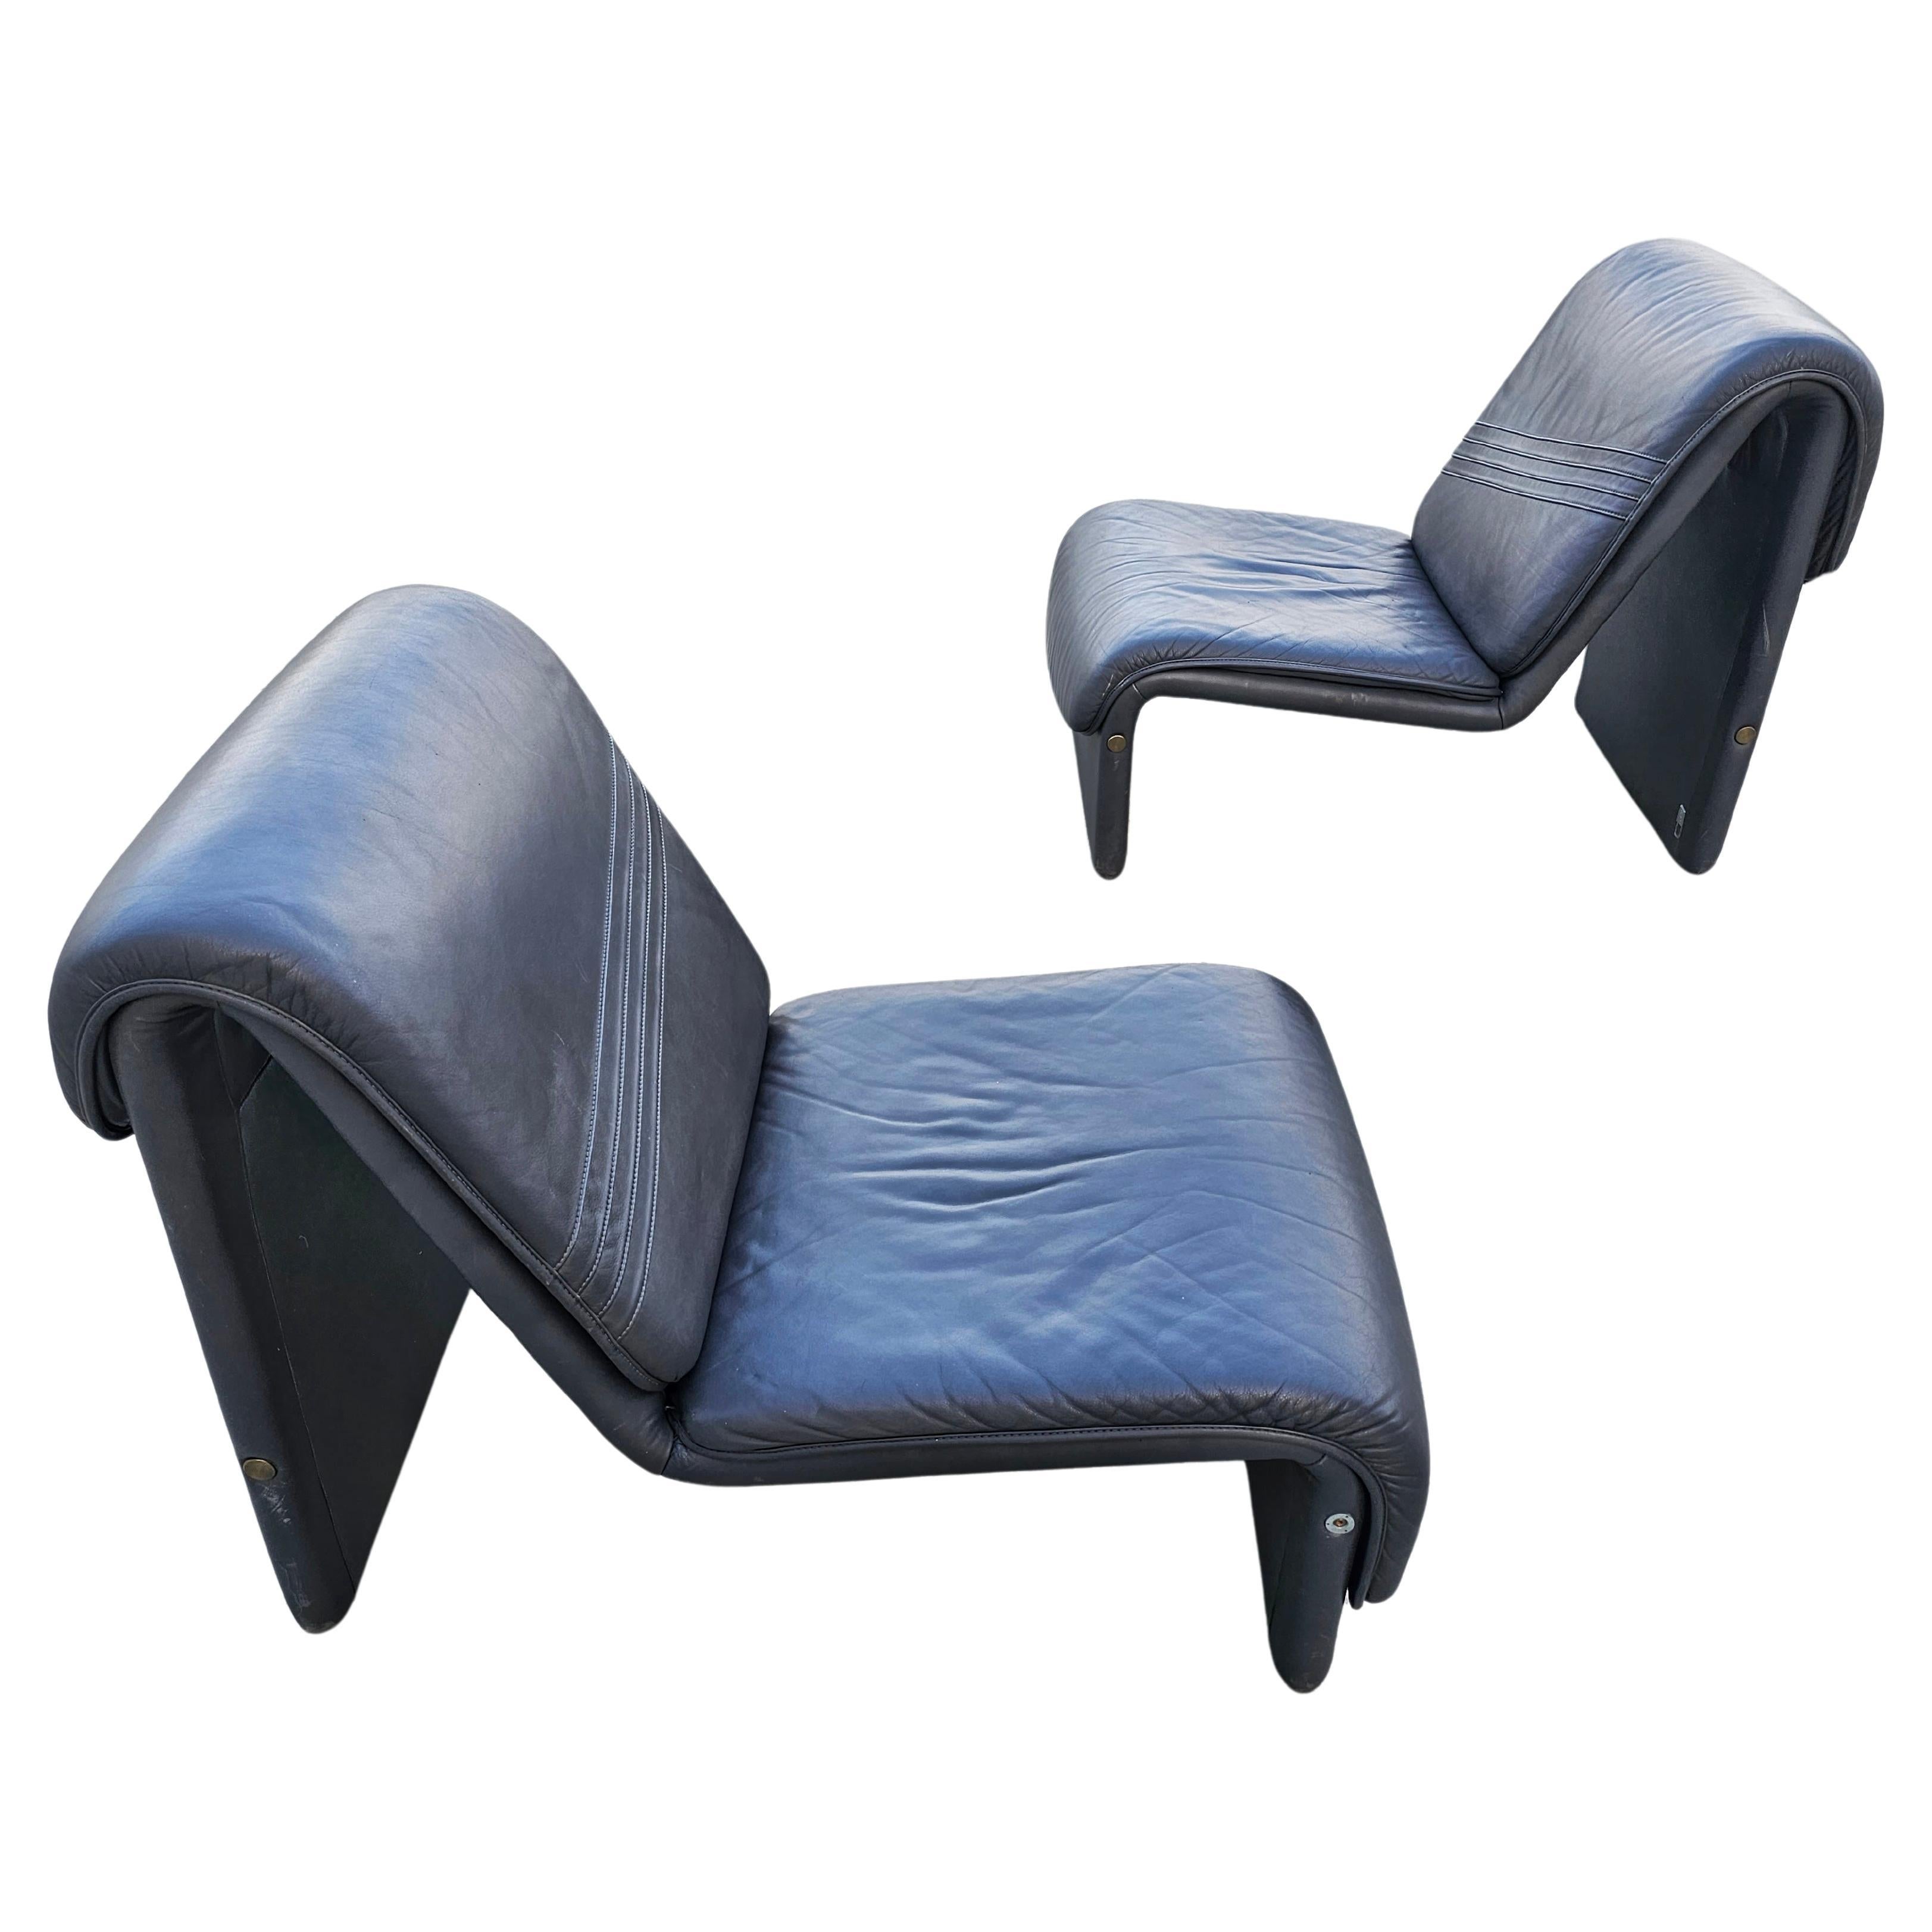 Postmodern Leather Lounge Chairs in style of Etienne Fermigier, Switzerland 1978 For Sale